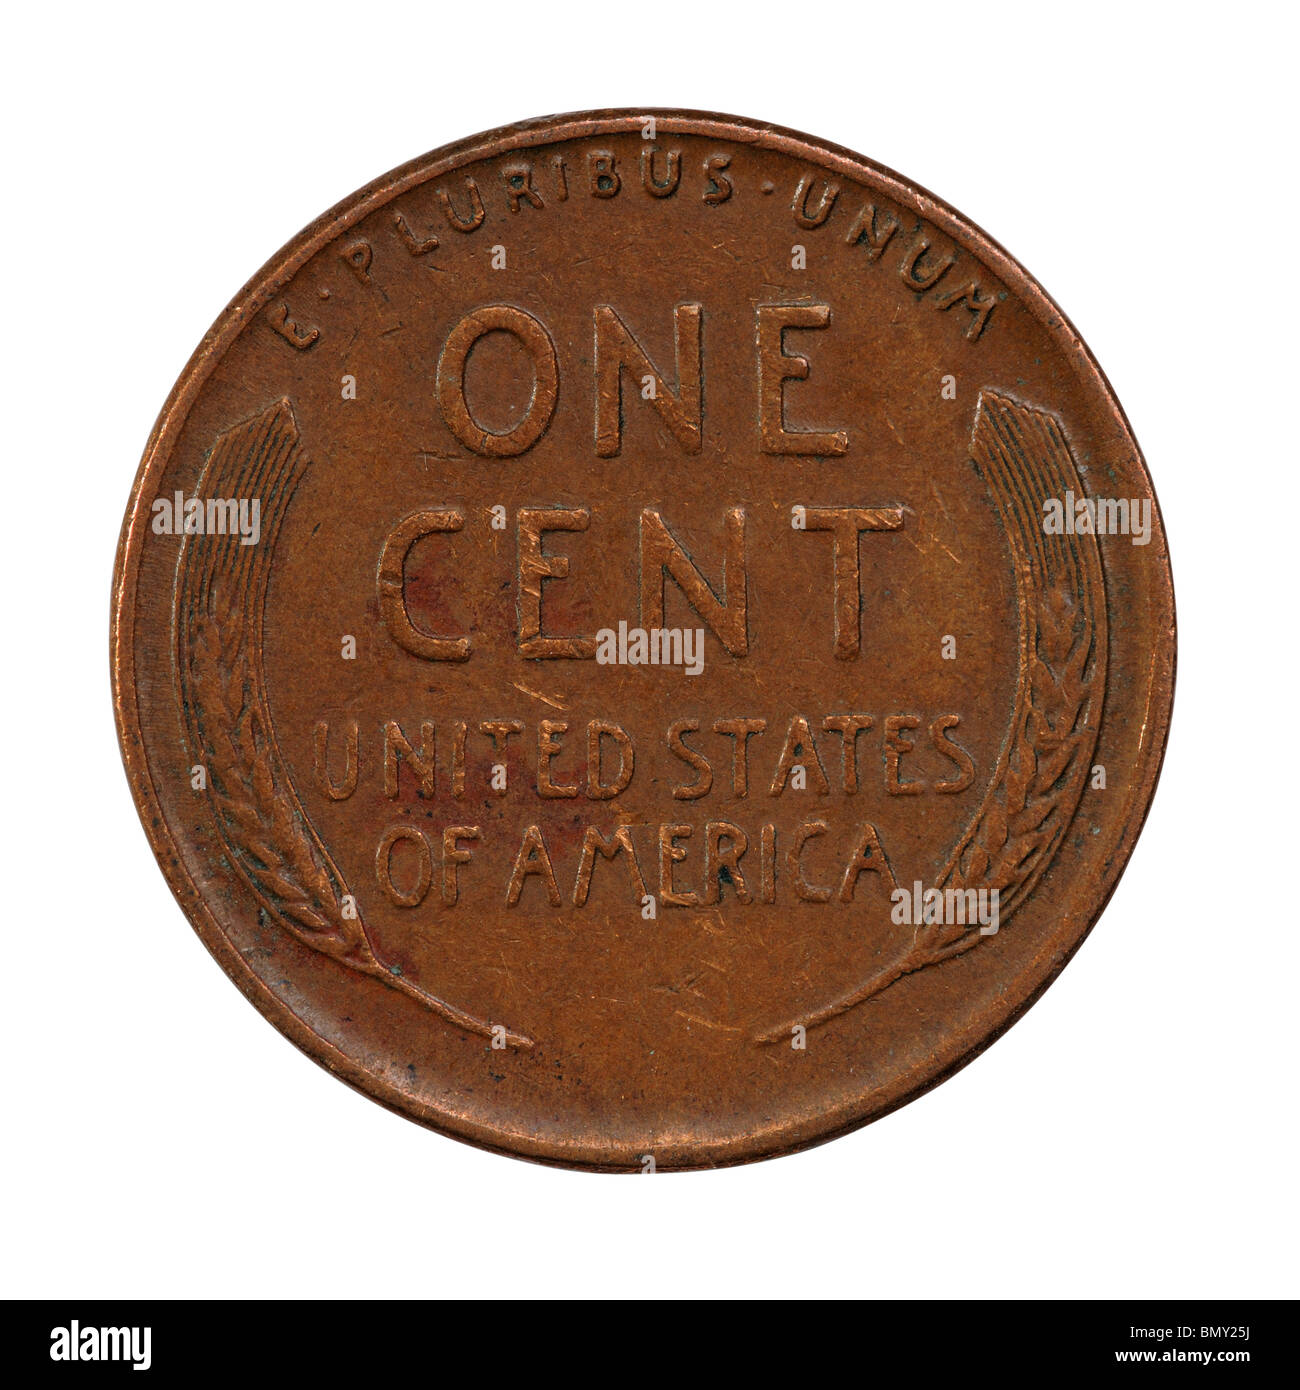 USA one cent coin Stock Photo